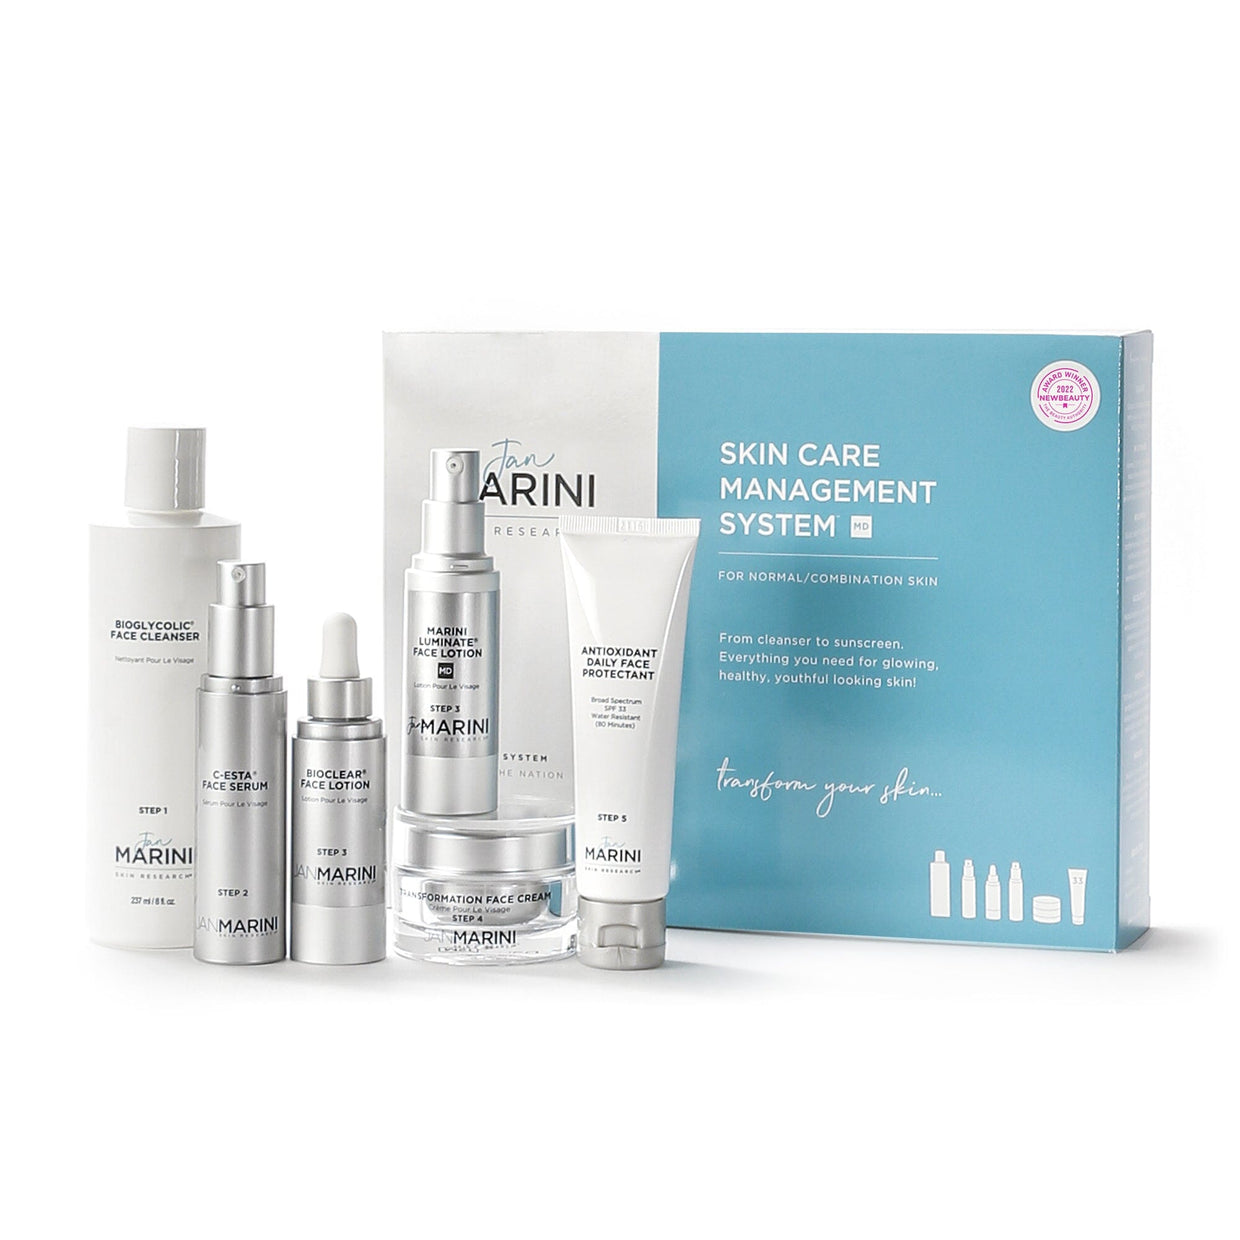 Jan Marini Skin Care Management System MD - Normal/Combination Skin with Antioxidant Daily Face Protectant SPF 33 Anti-Aging Skin Care Kits Jan Marini Shop at Exclusive Beauty Club